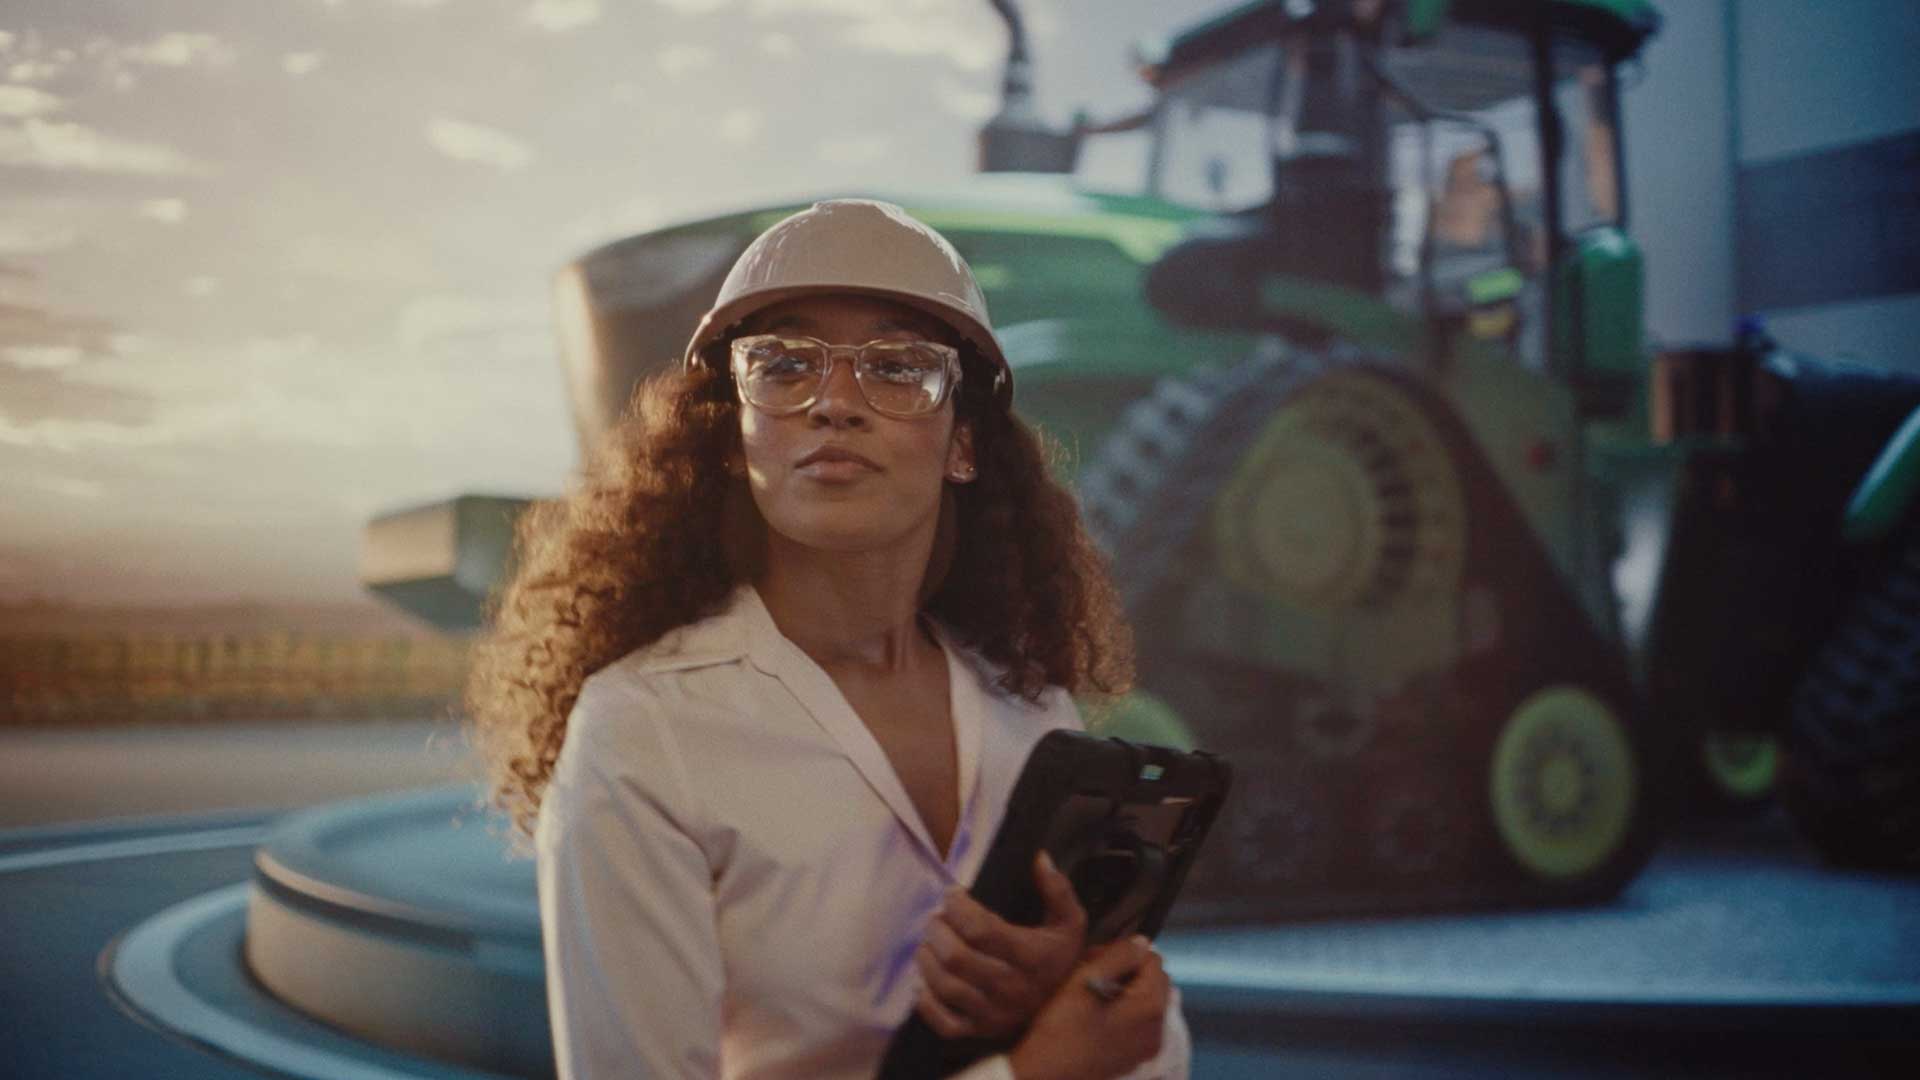 Still from John Deere's All Kinds of Fields spot of Maya holding clipboard in front of large modern tracor